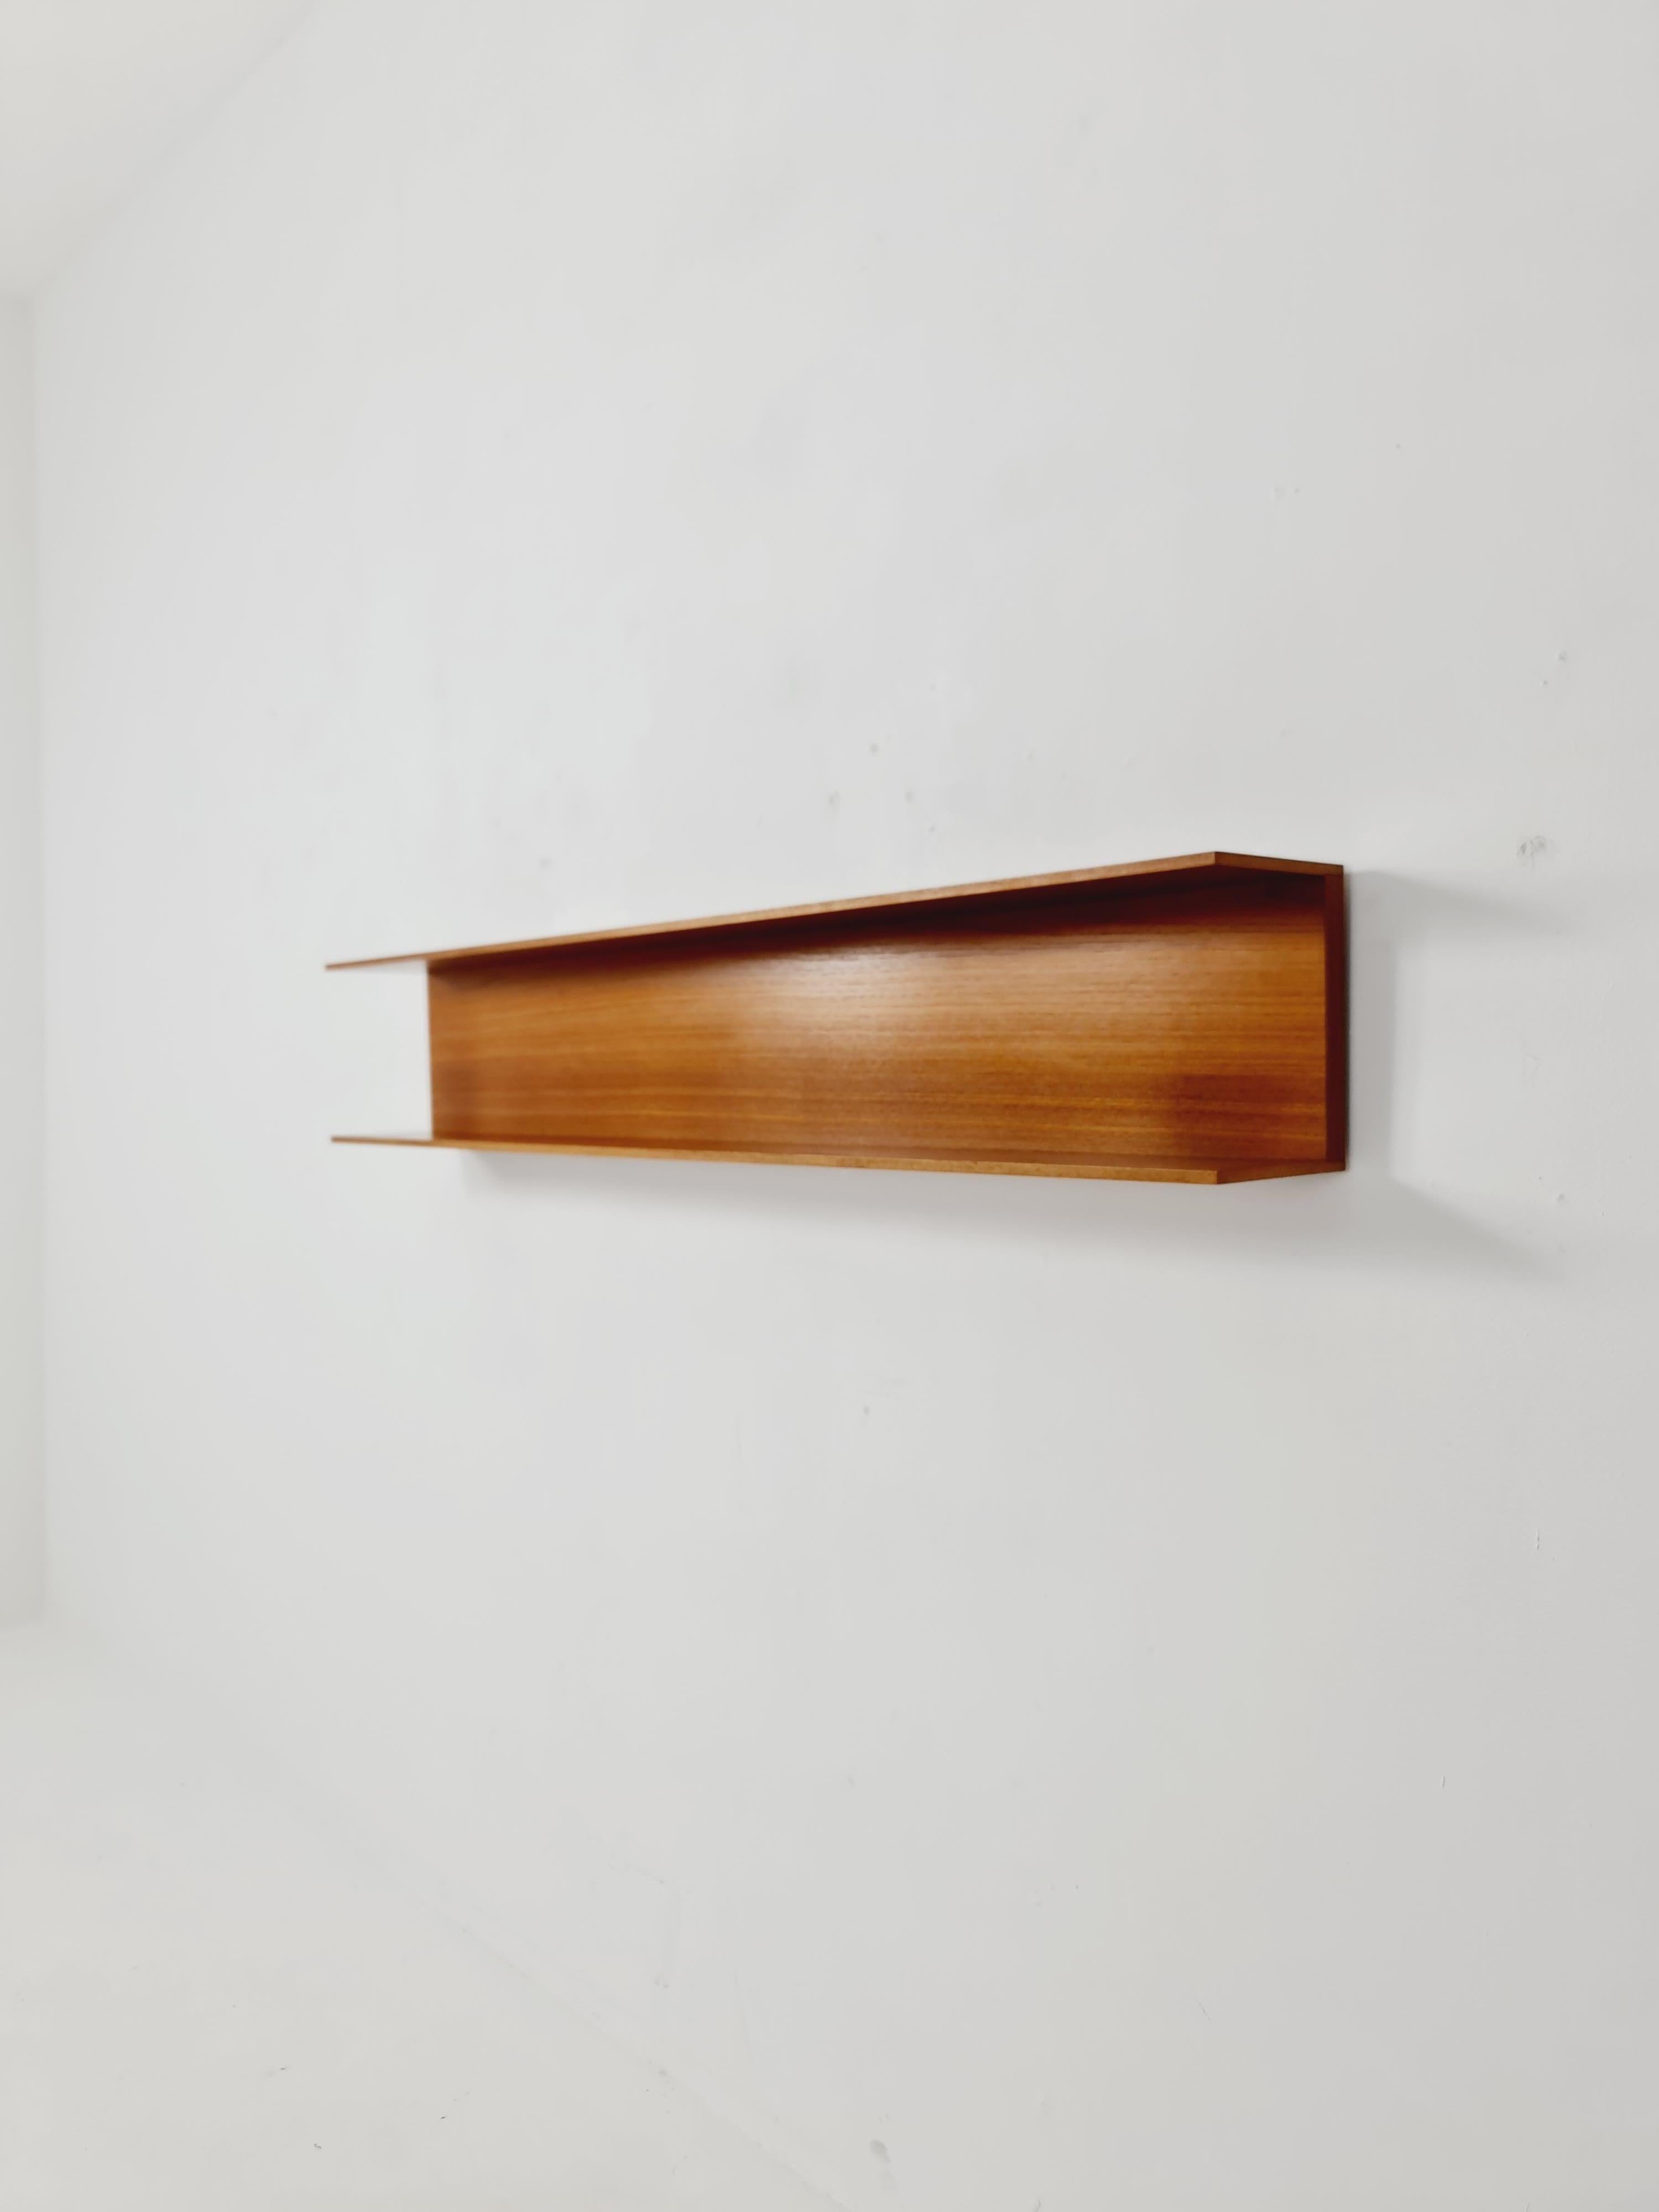 Long  German Wilheilm Renz for Walter Renz  hanging shelf, 1960s

Design year: 1960s

Dimensions per shelf : 20  D x 150  B x 26 H cm


Good vintage condition, however, as with all vintage items some minor wear marks should be expected.

Please